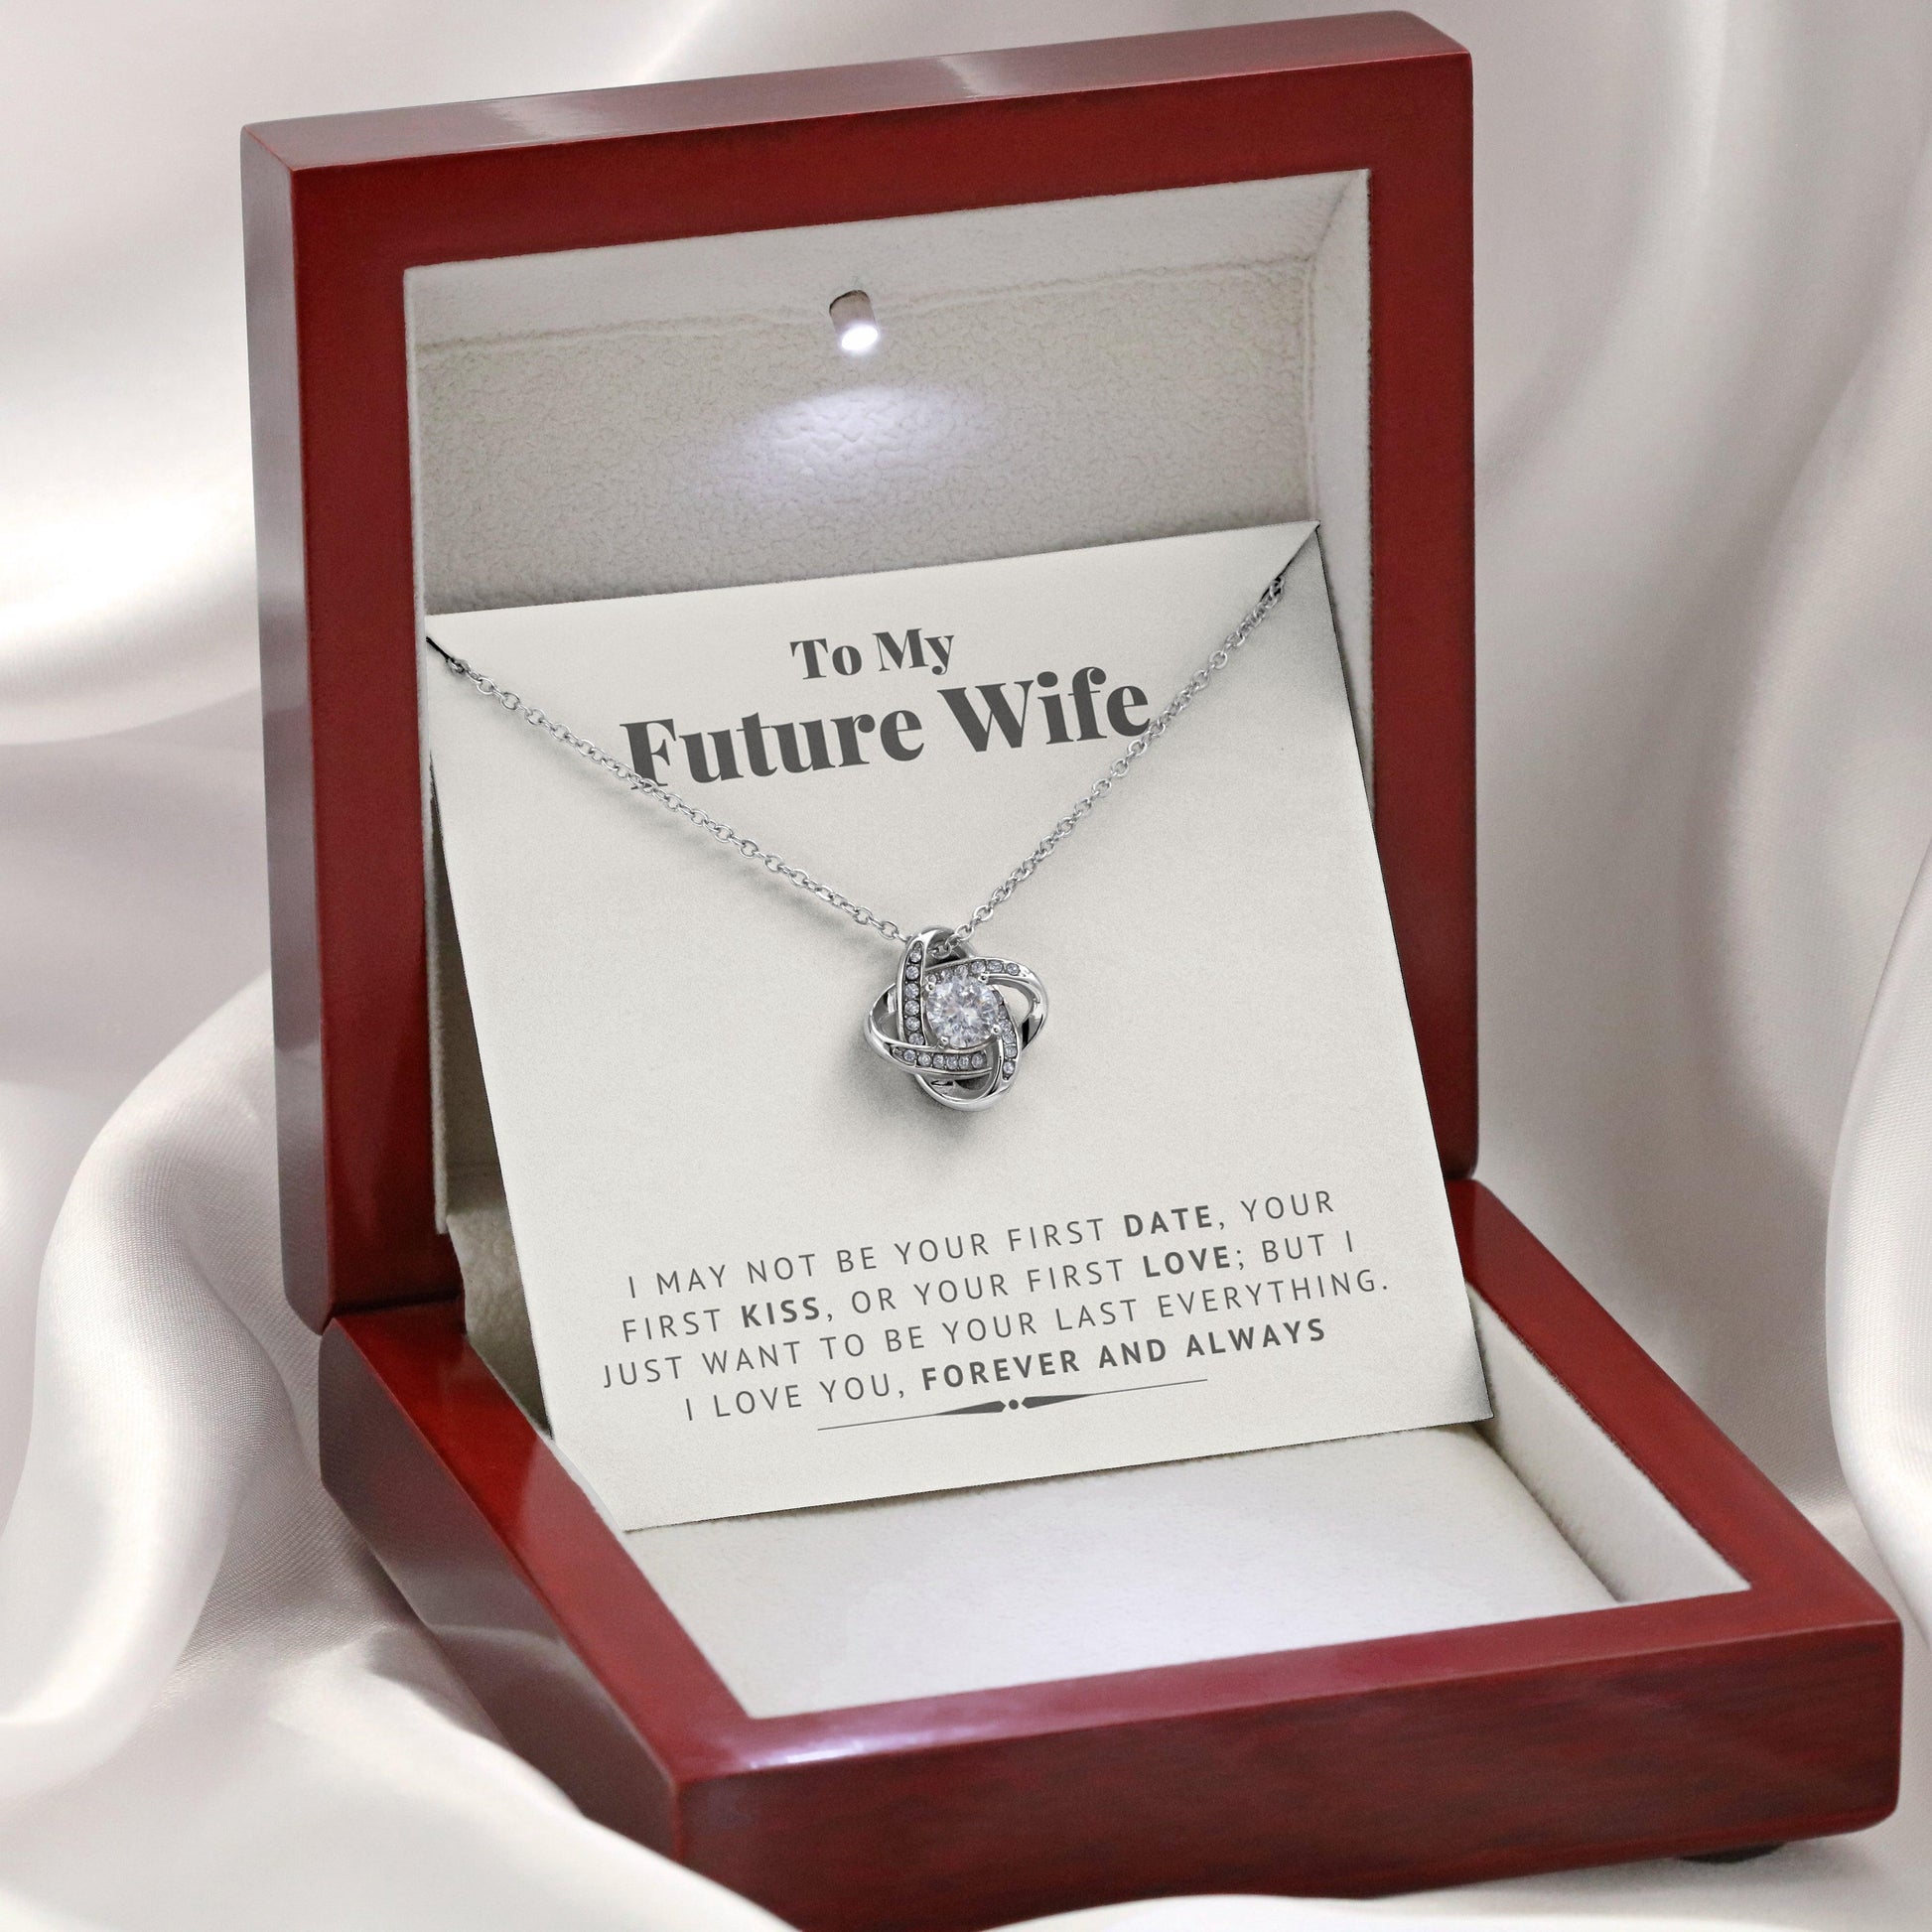 Jewelry gifts Future Wife - I Love You - LK Love Set - Belesmé - Memorable Jewelry Gifts 